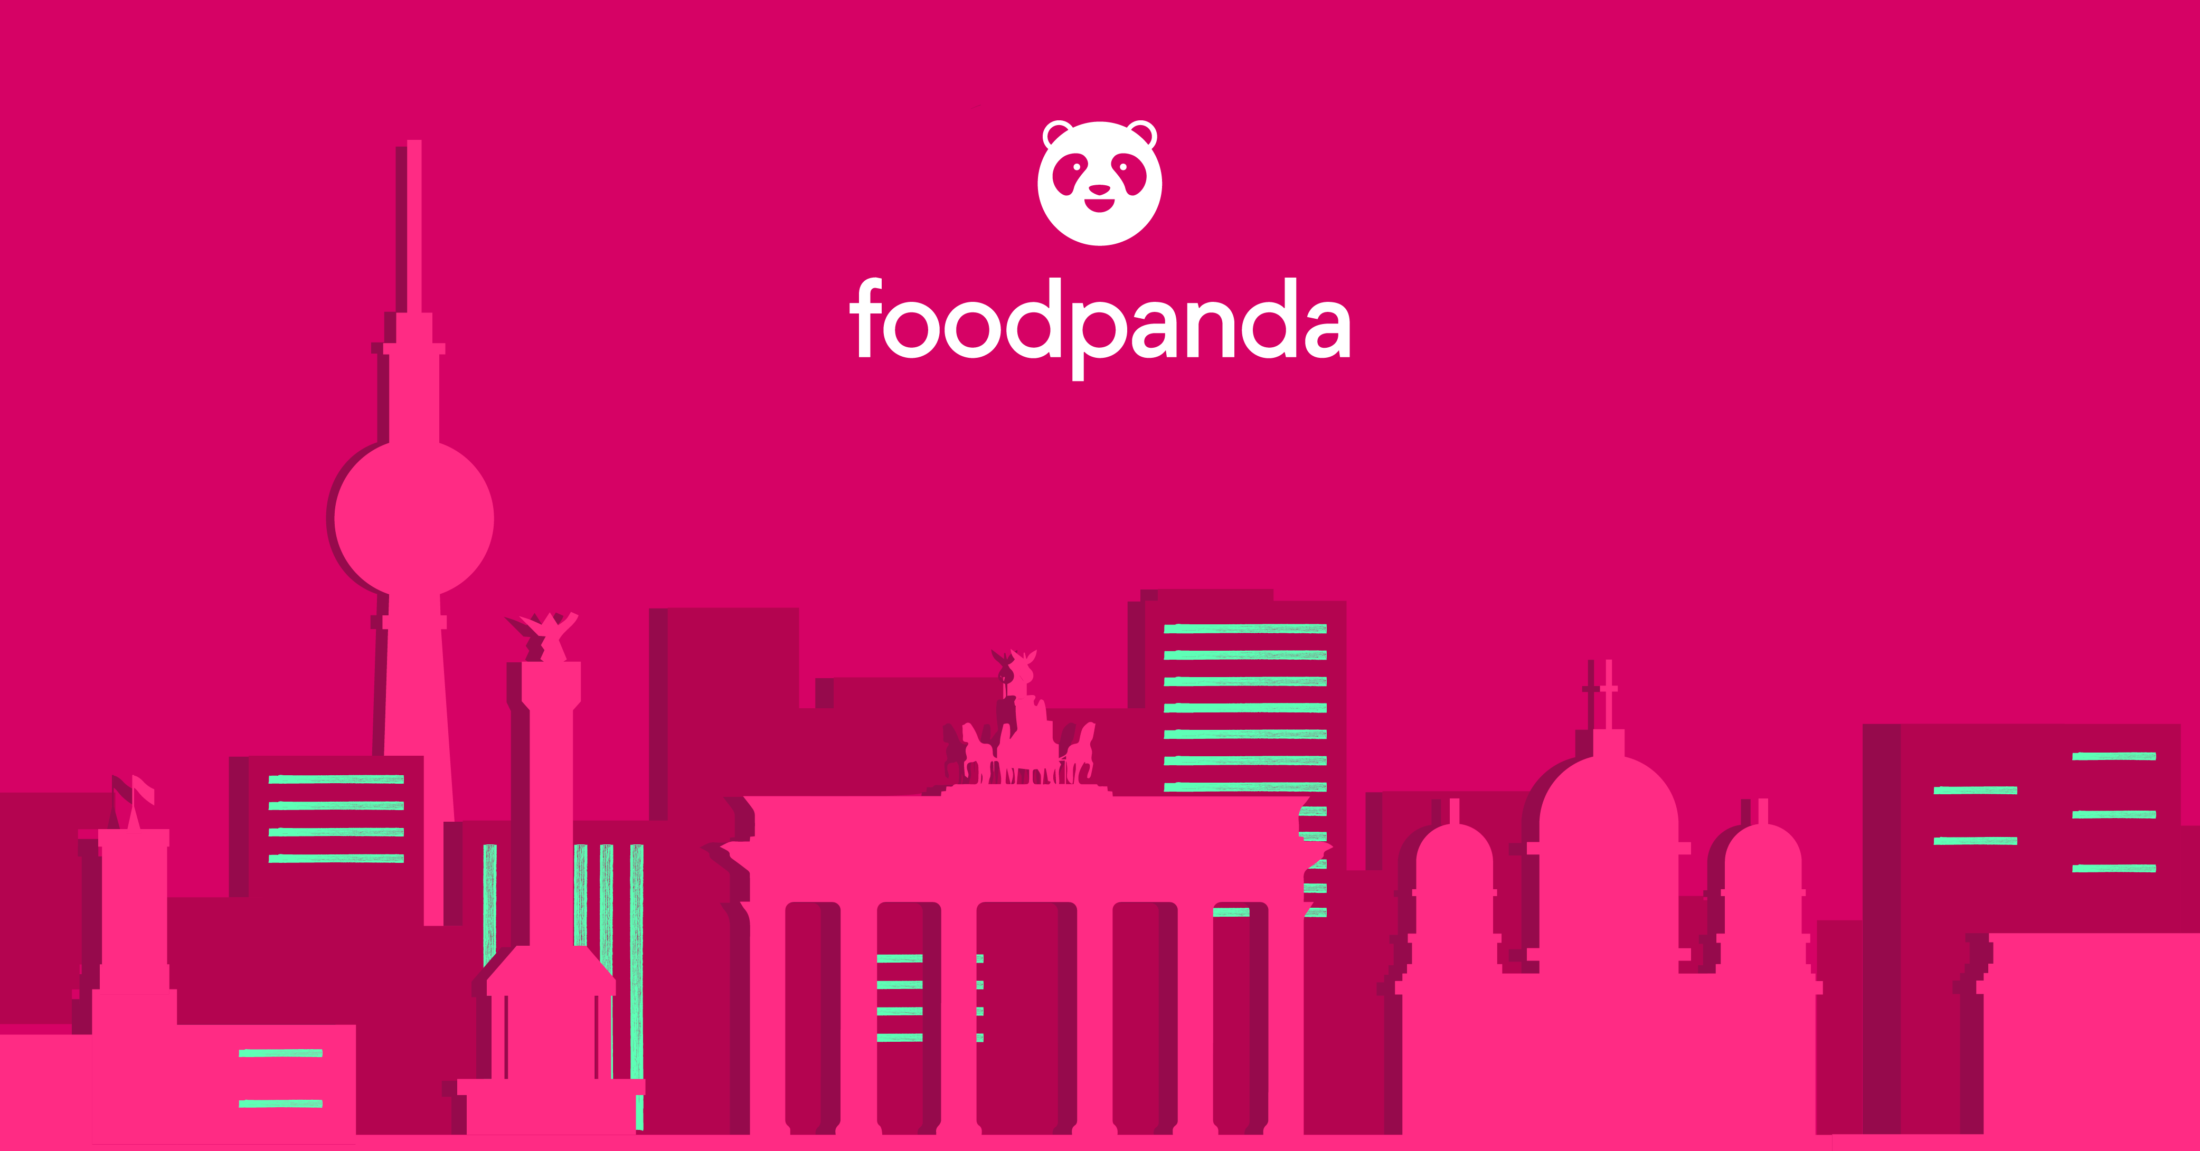 Delivery Hero brings foodpanda to the streets of Berlin and announces German expansion